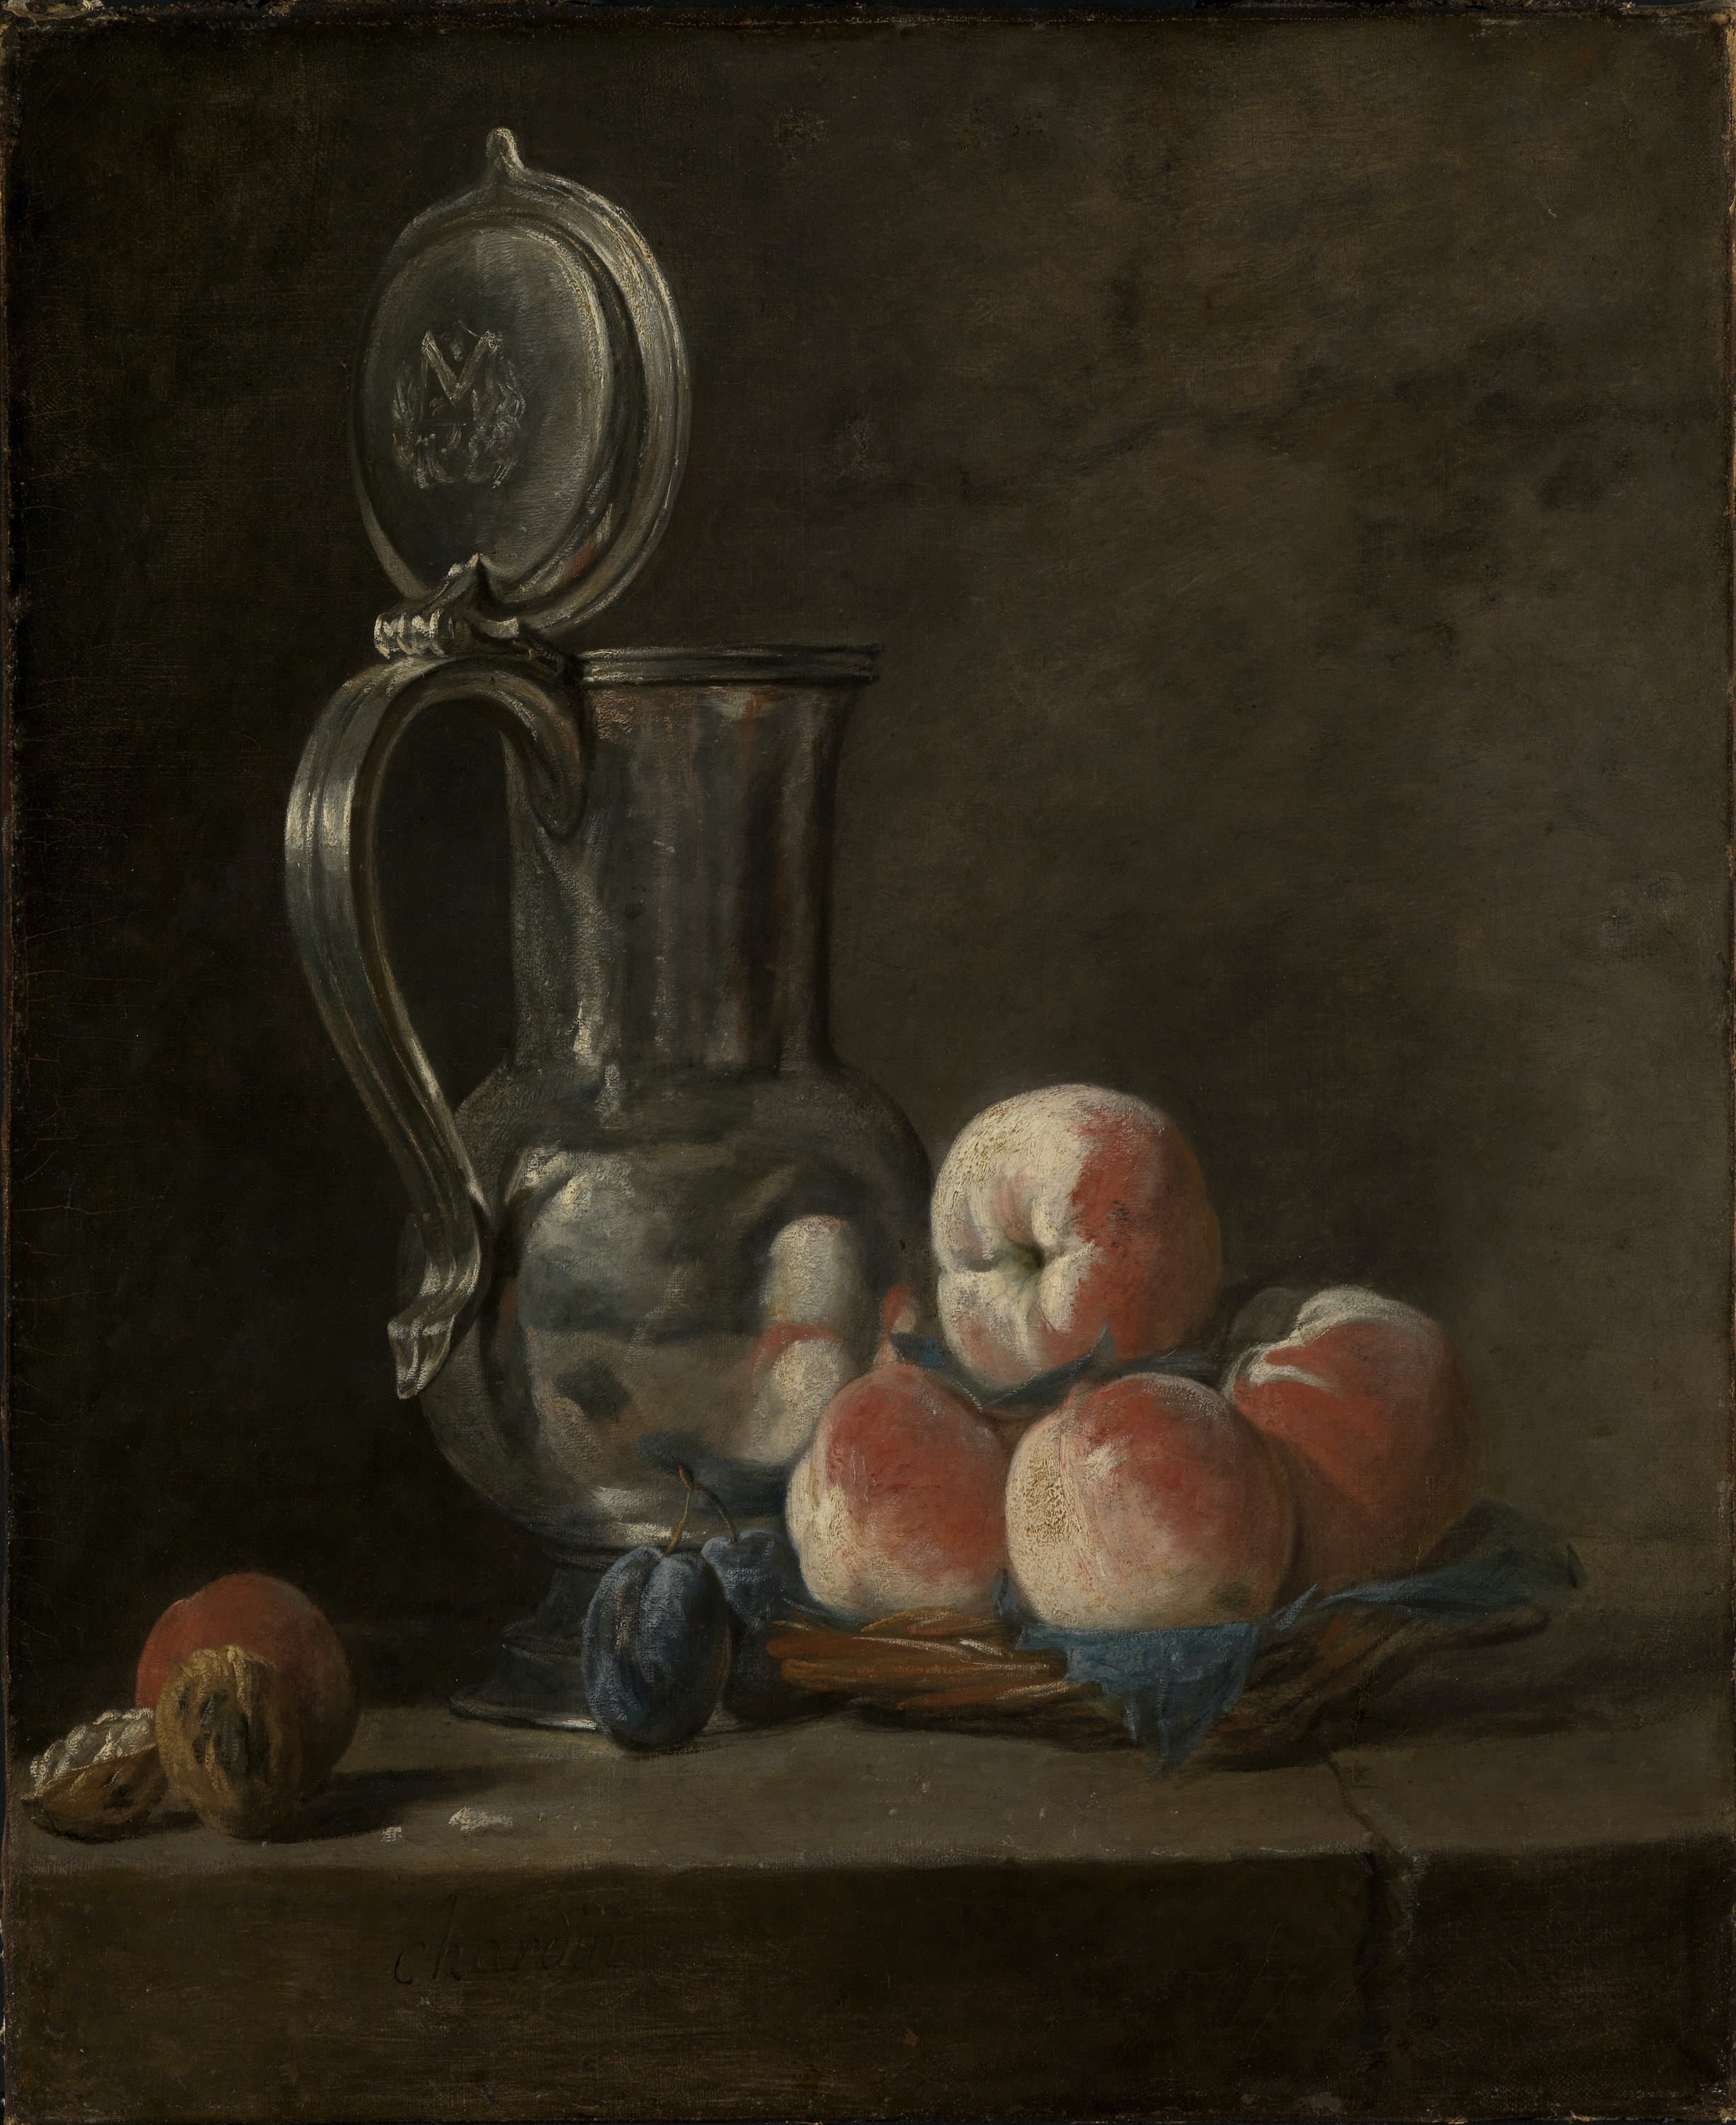 Still Life with Tin Pitcher and Peaches by Jean-Baptiste-Siméon Chardin - 1728 - 46 x 55,5 cm Staatliche Kunsthalle Karlsruhe